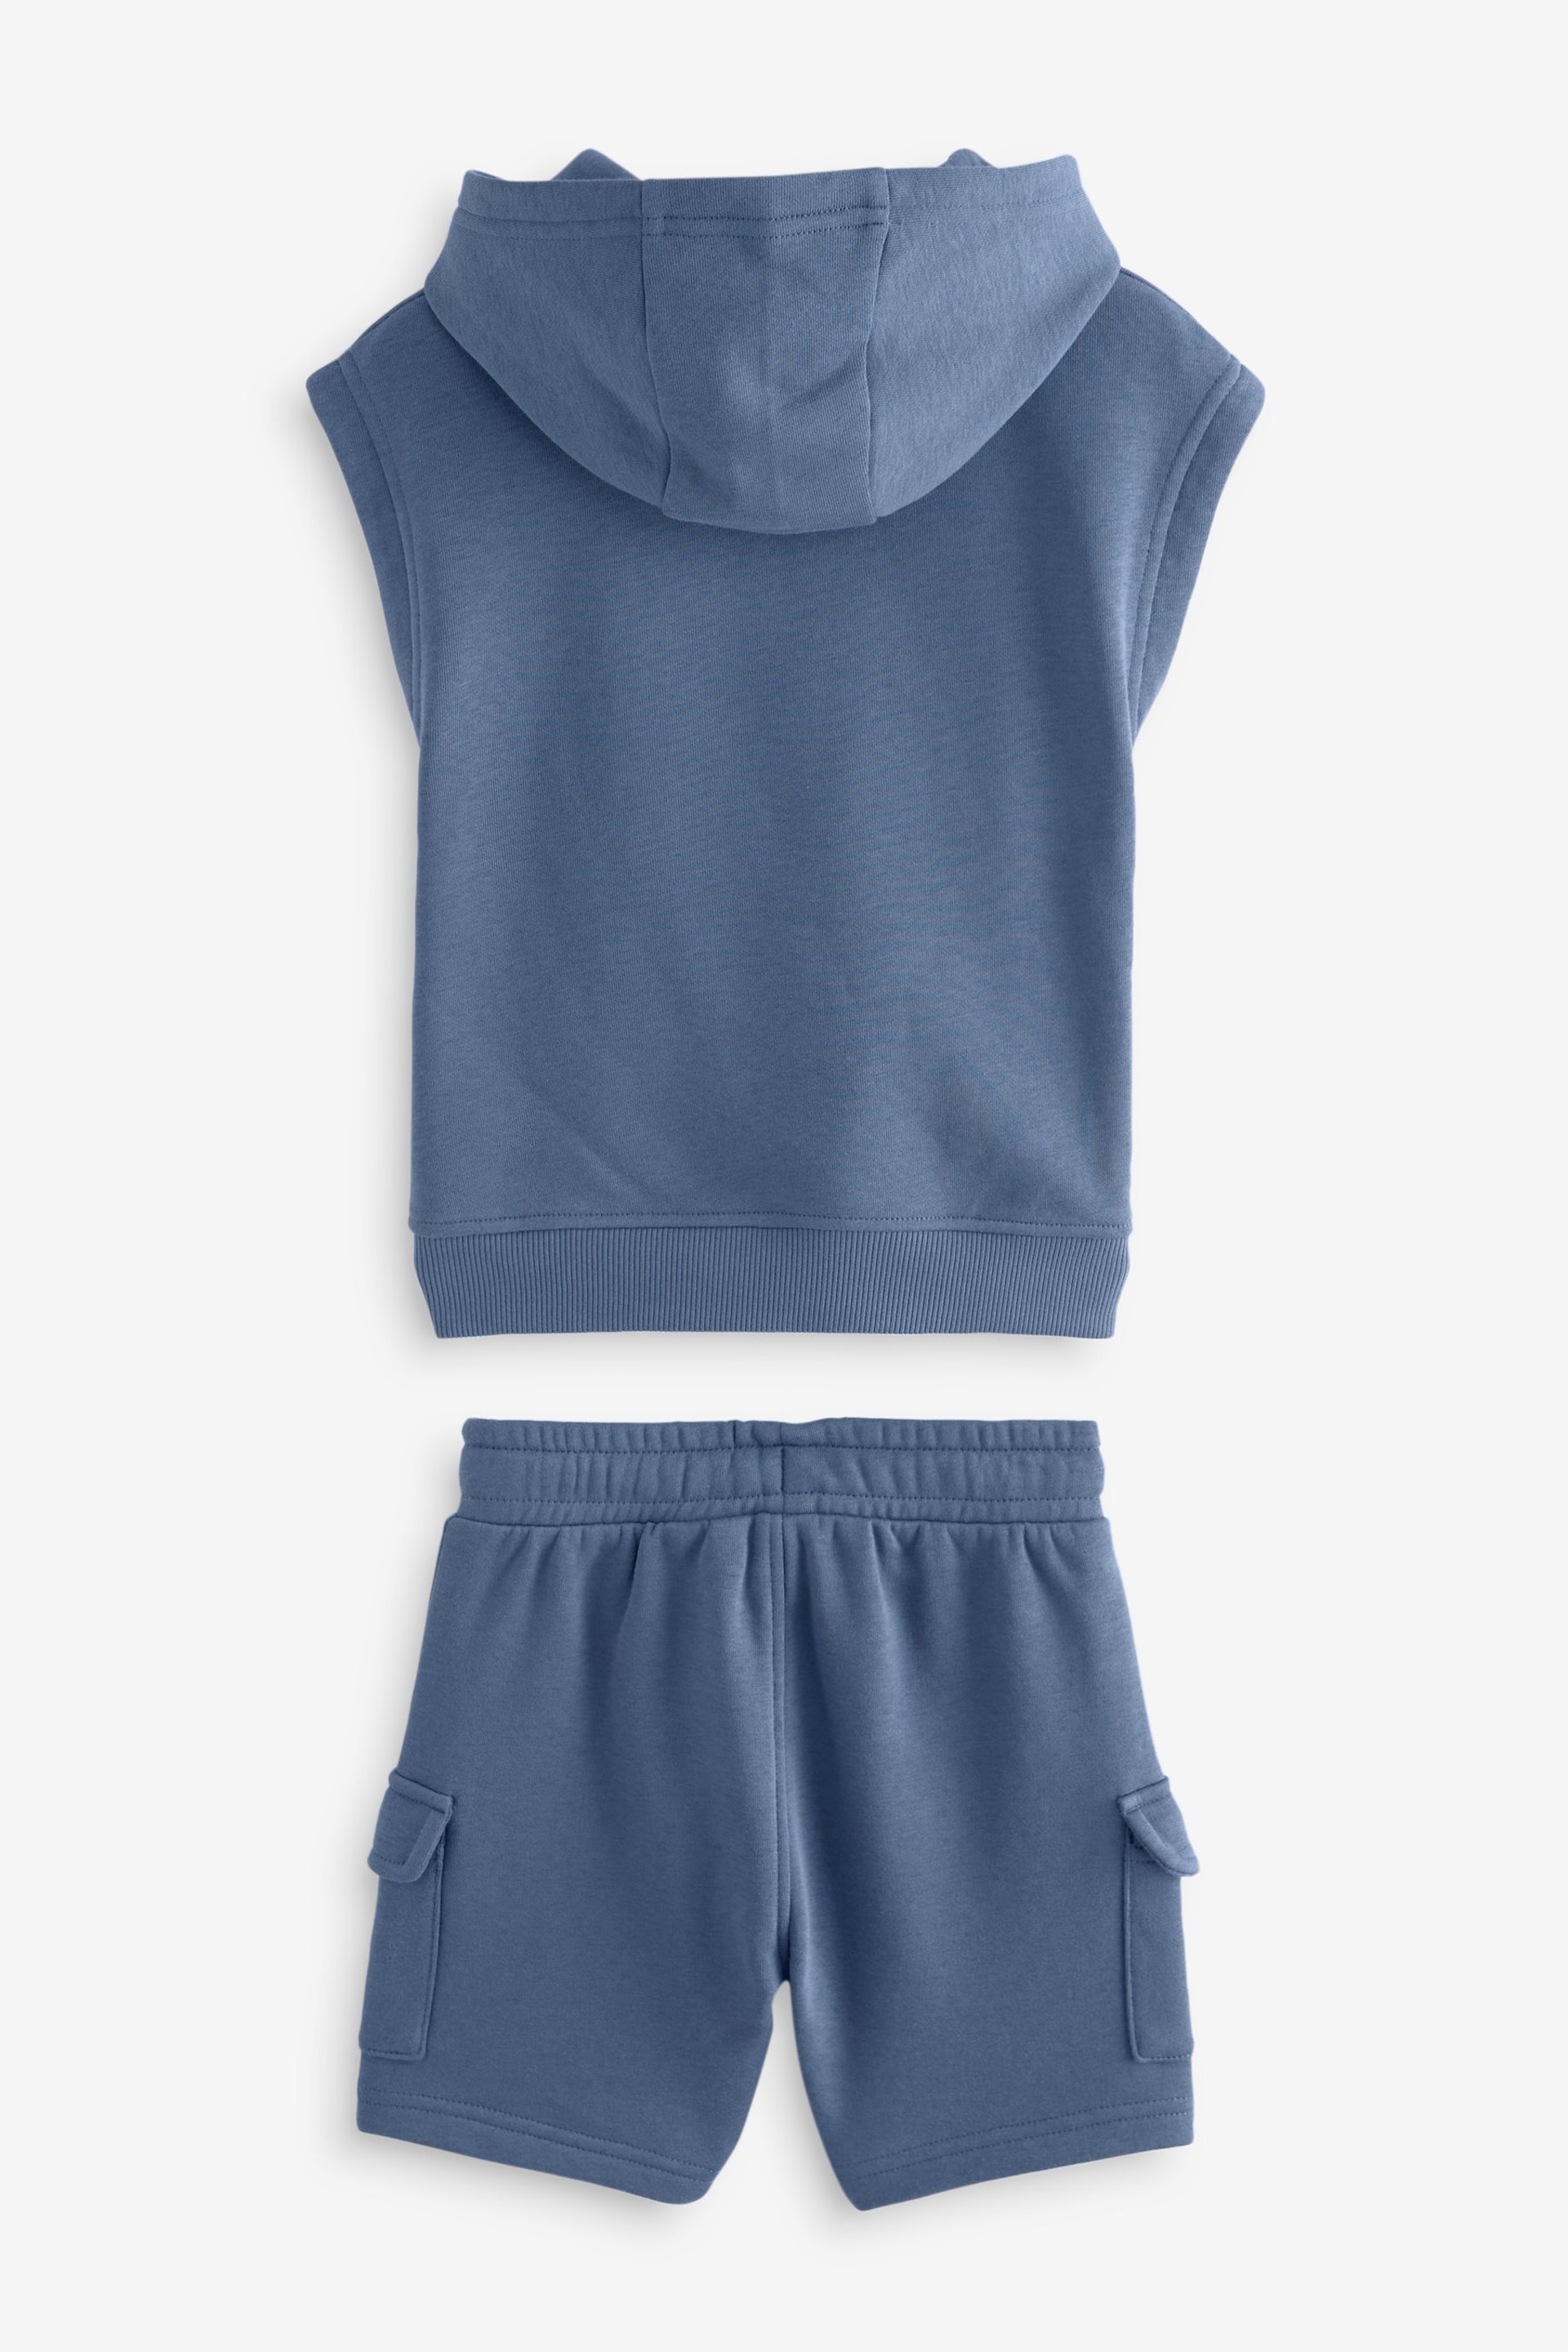 Navy Short Sleeve Utility Hoodie and Shorts Set (3mths-7yrs) - Image 8 of 9